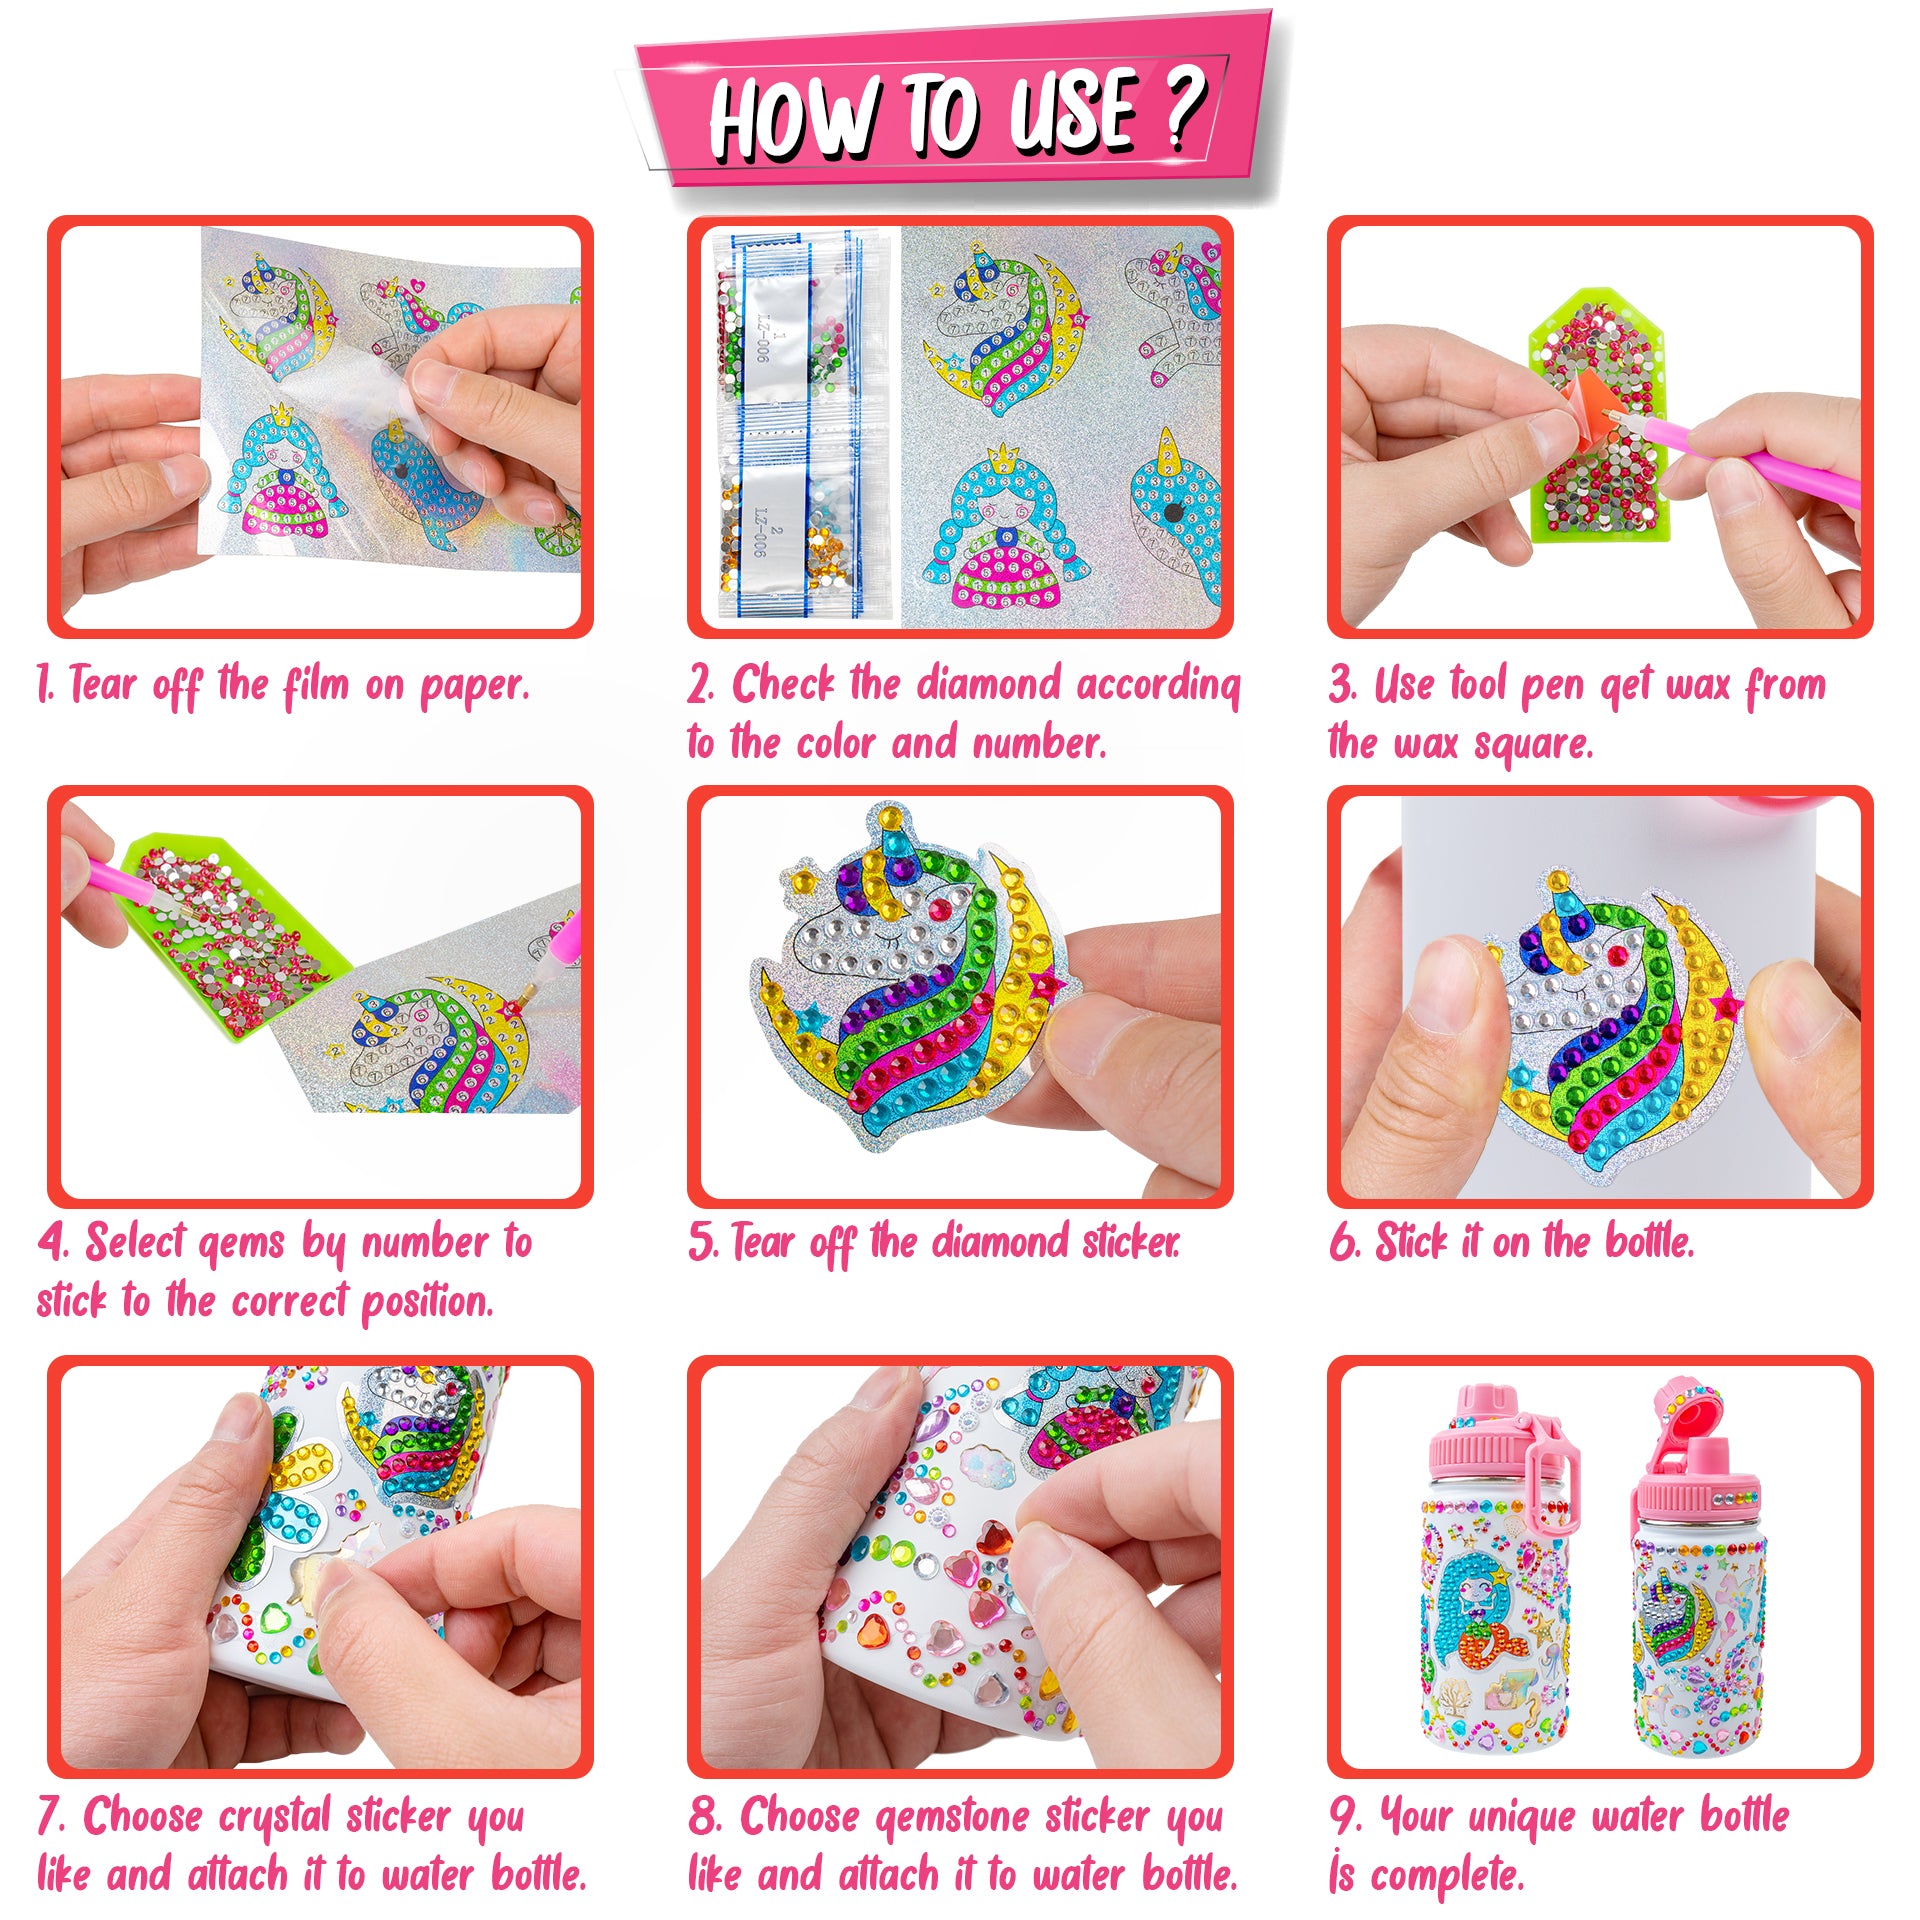 SUNNYPIG Girls Gifts Age 7 8 9 10 11 12, Toys for Teenage Birthday Presents  DIY Unicorn Charm Jewellery Gifts for 7 8 9 10 11 Year Old Girls Bracelets  Making Sets Toys for Kids Age 9 10 11 12 13 - Walmart.com